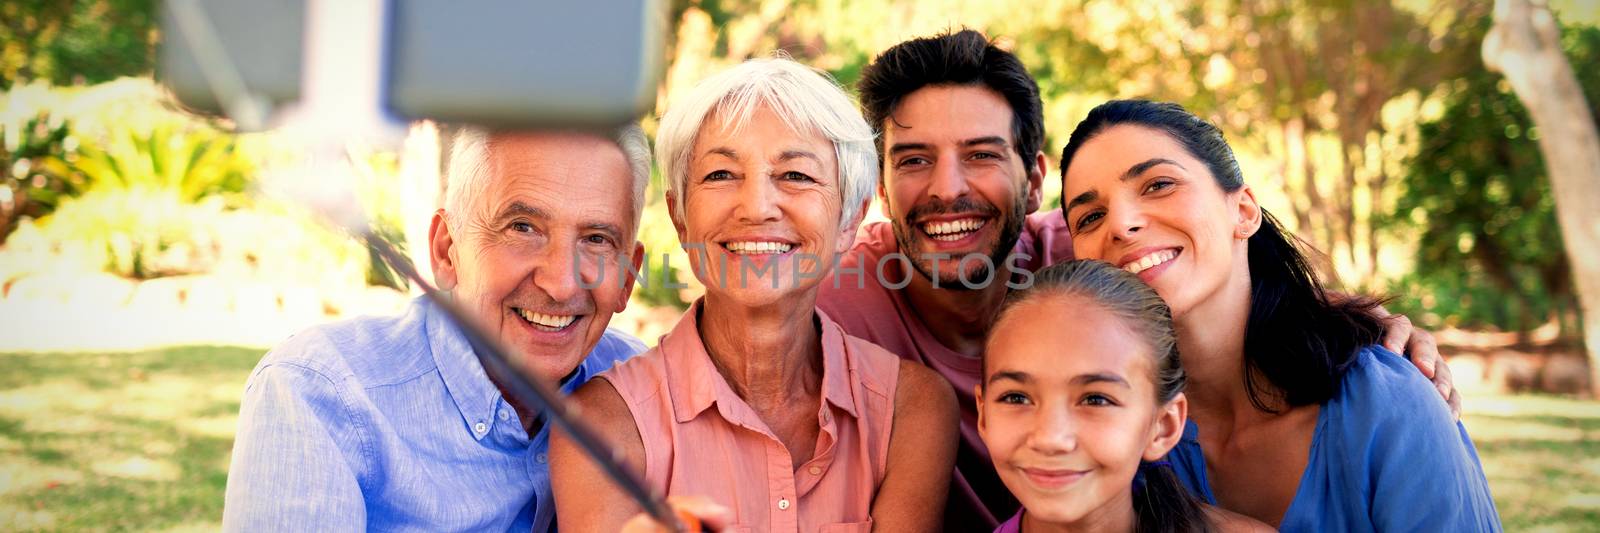 Smiling family taking a selfie in the park